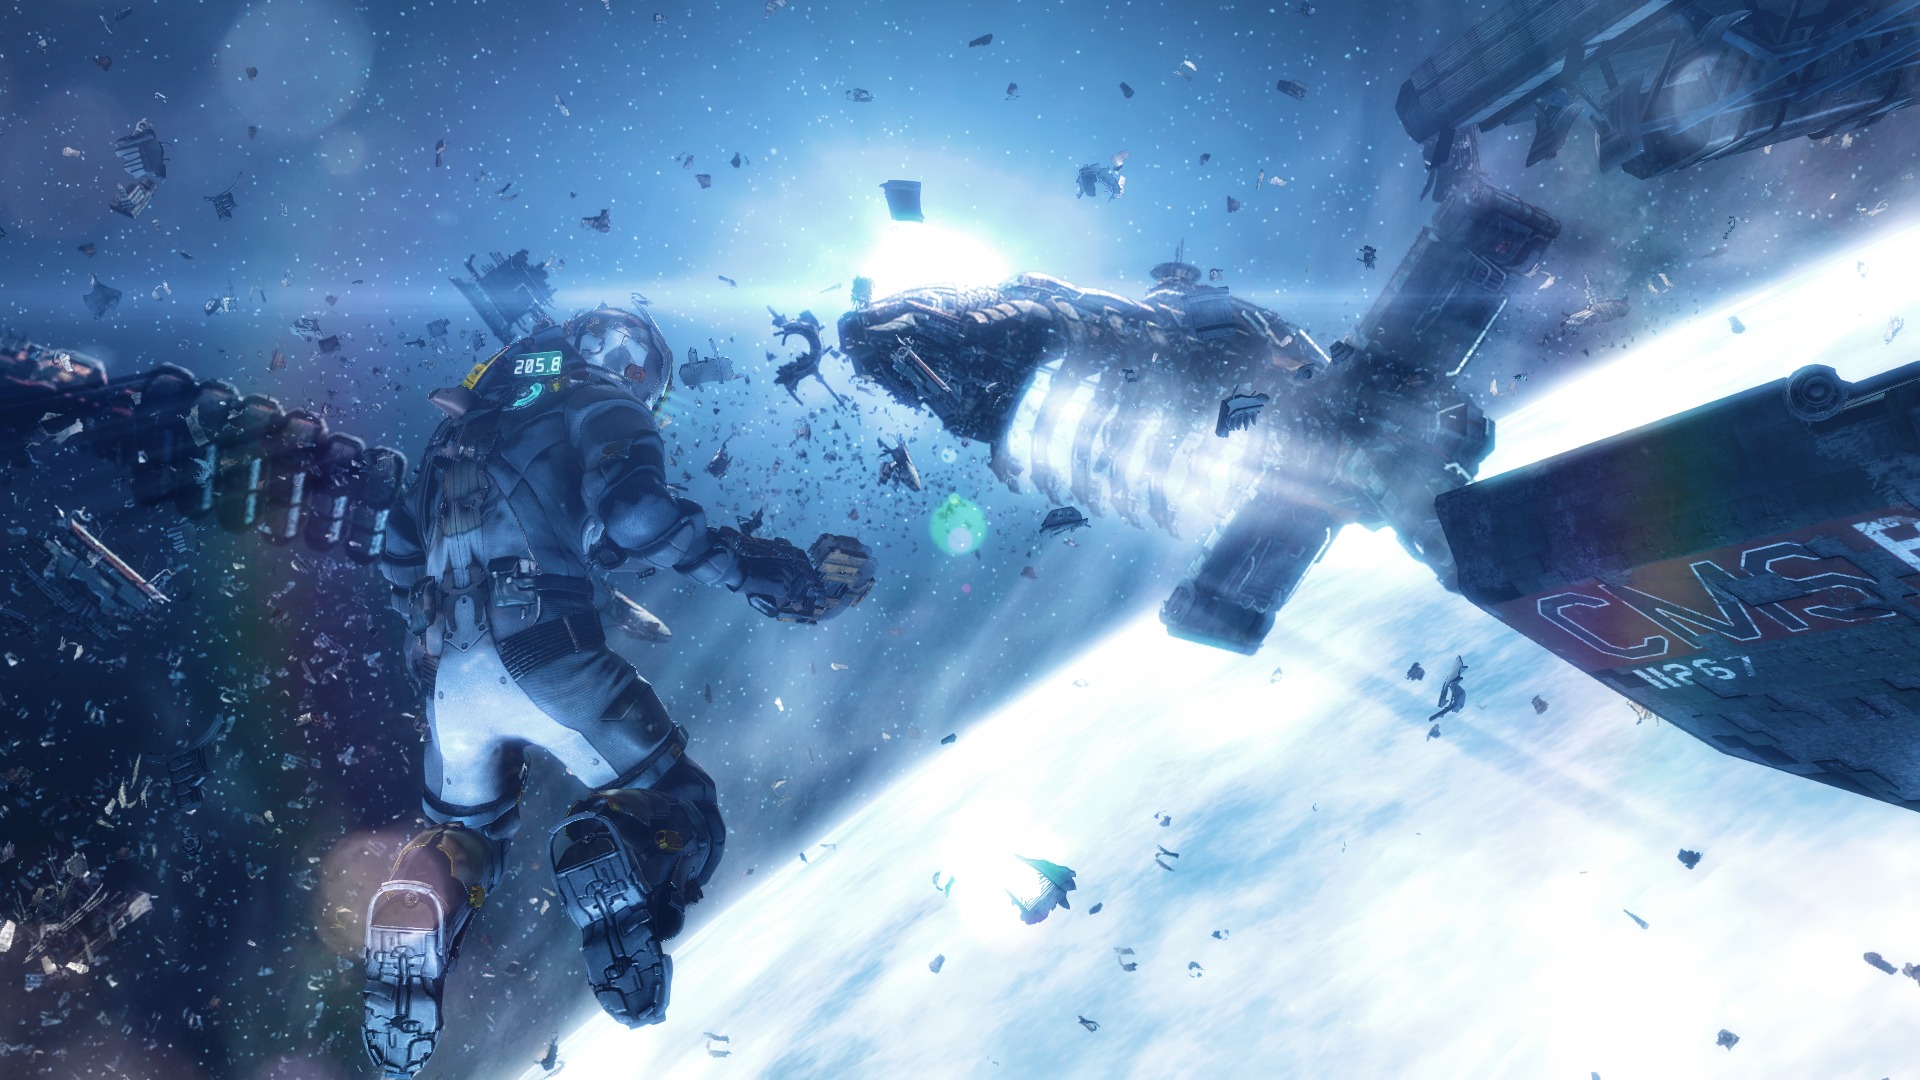 Dead Space 3 Screenshots - Image #11128 | New Game Network